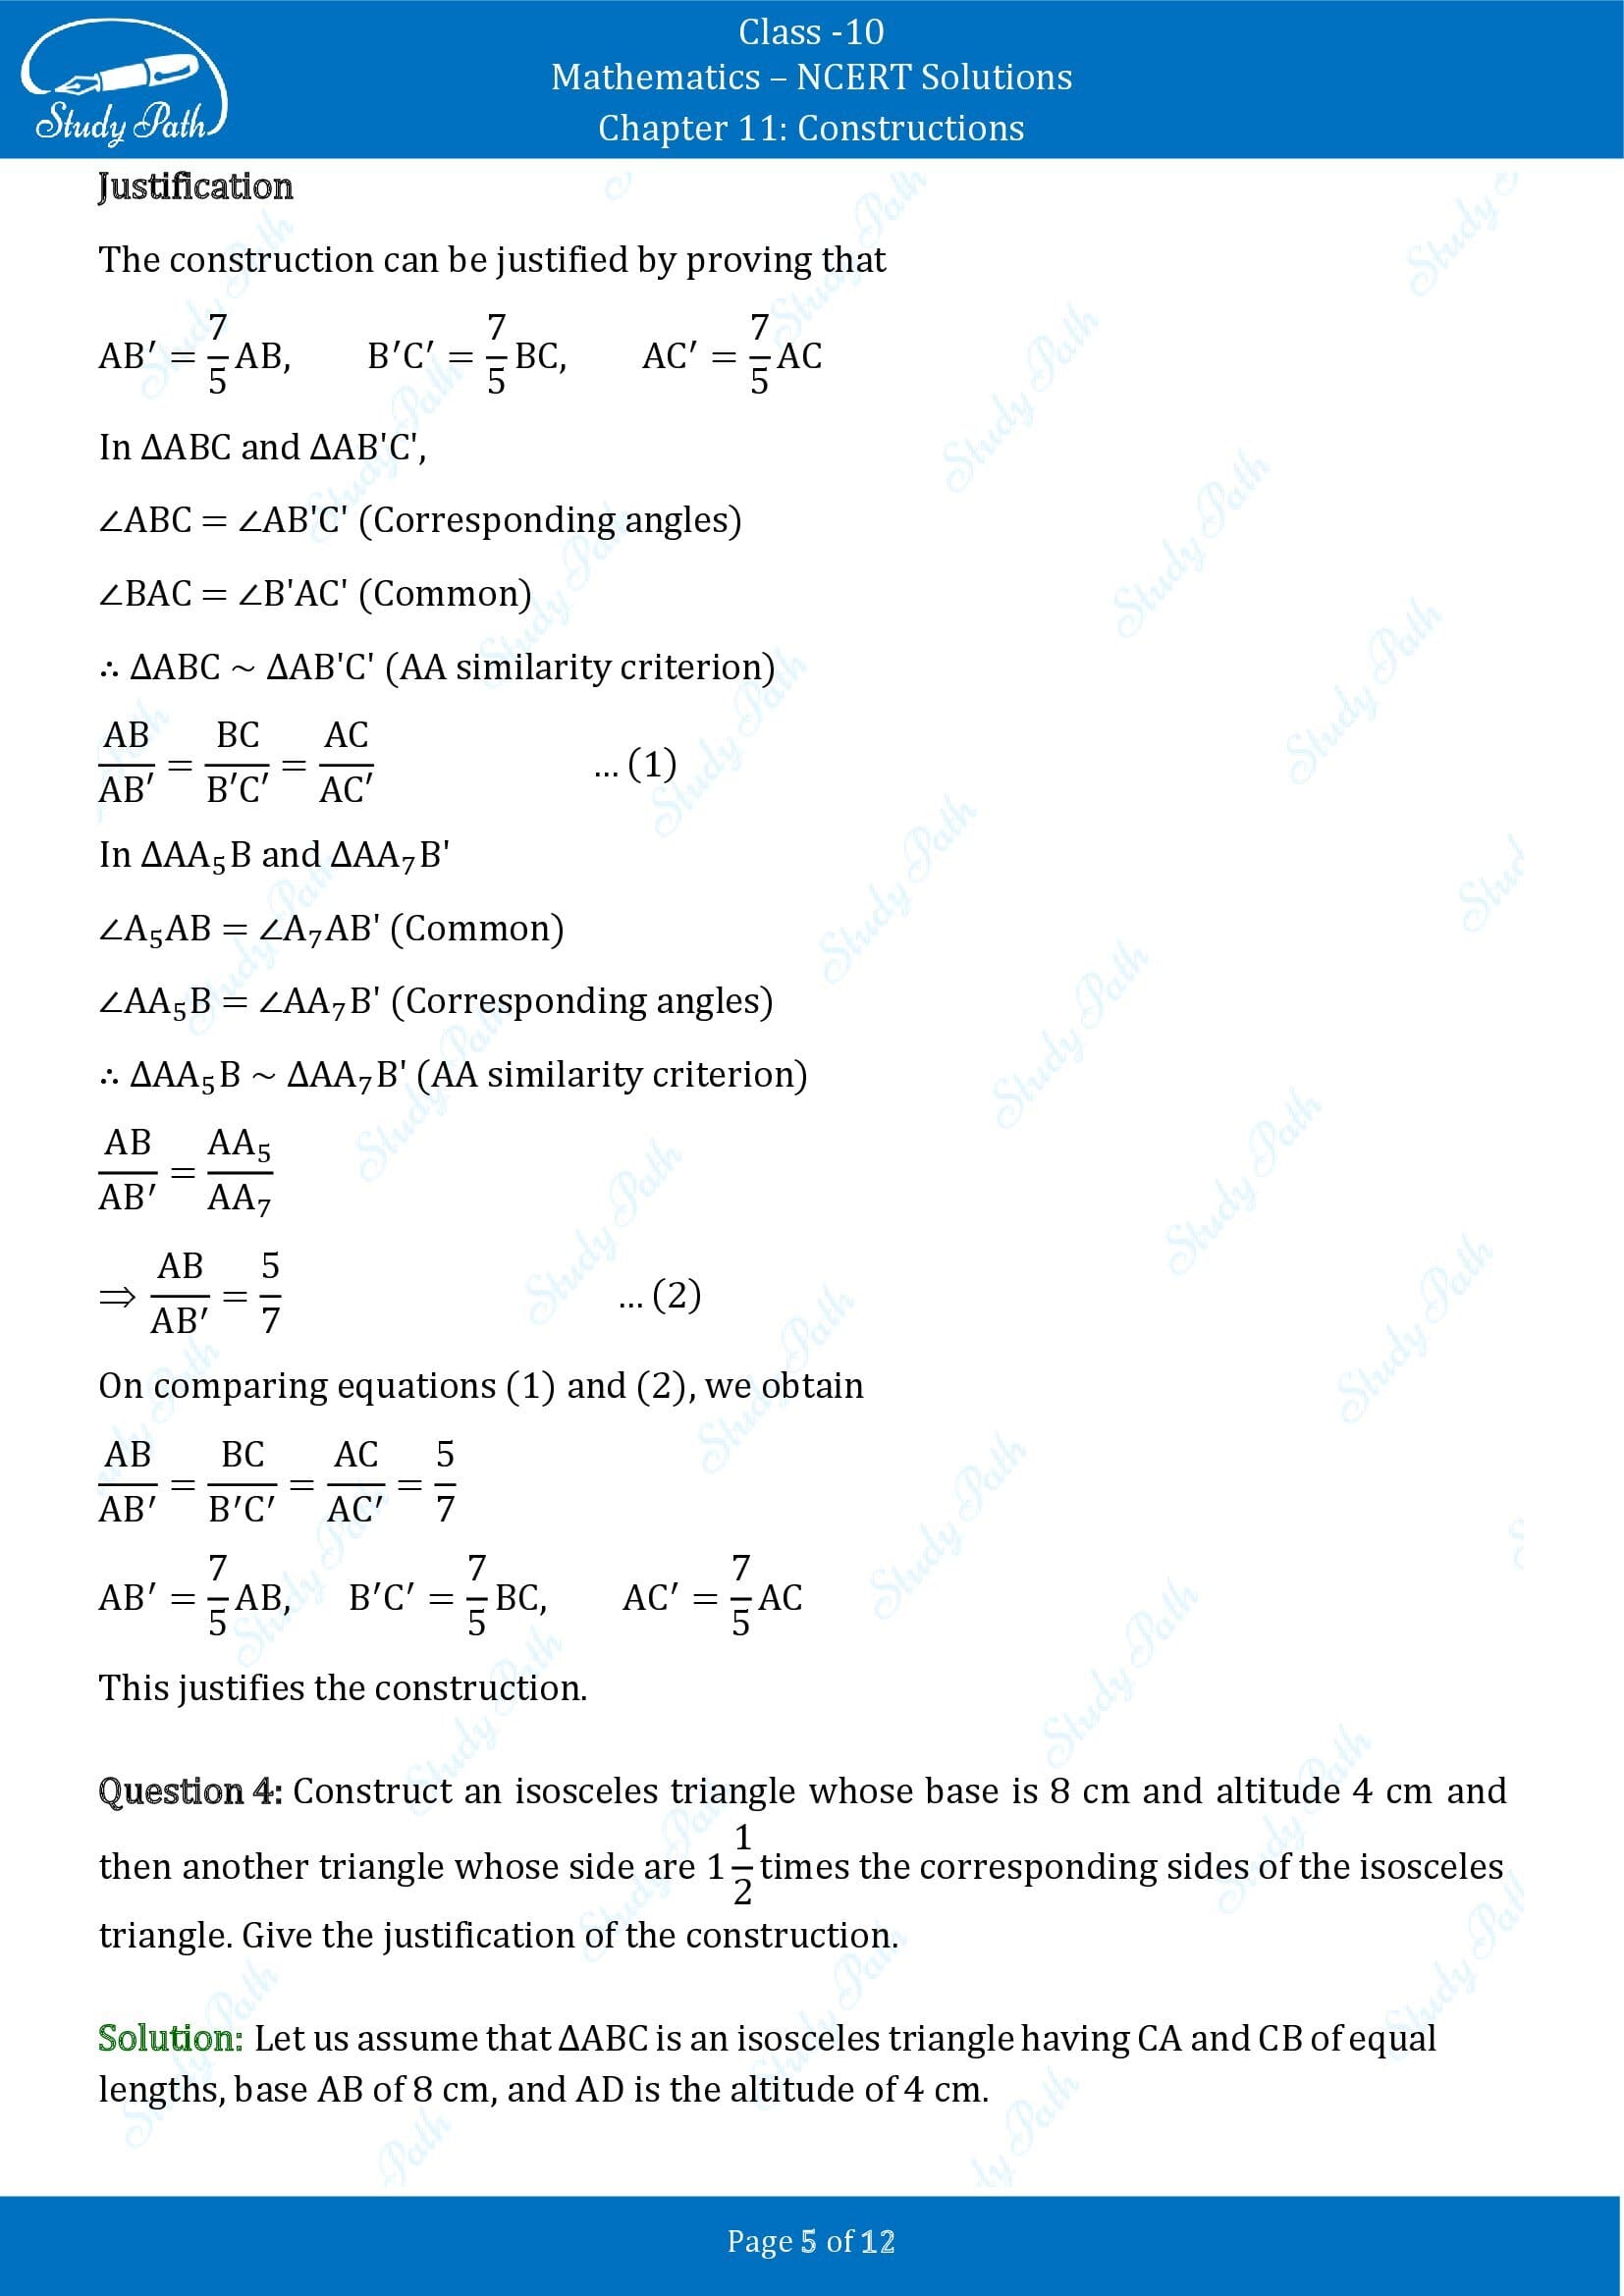 NCERT Solutions for Class 10 Maths Chapter 11 Constructions Exercise 11.1 00005